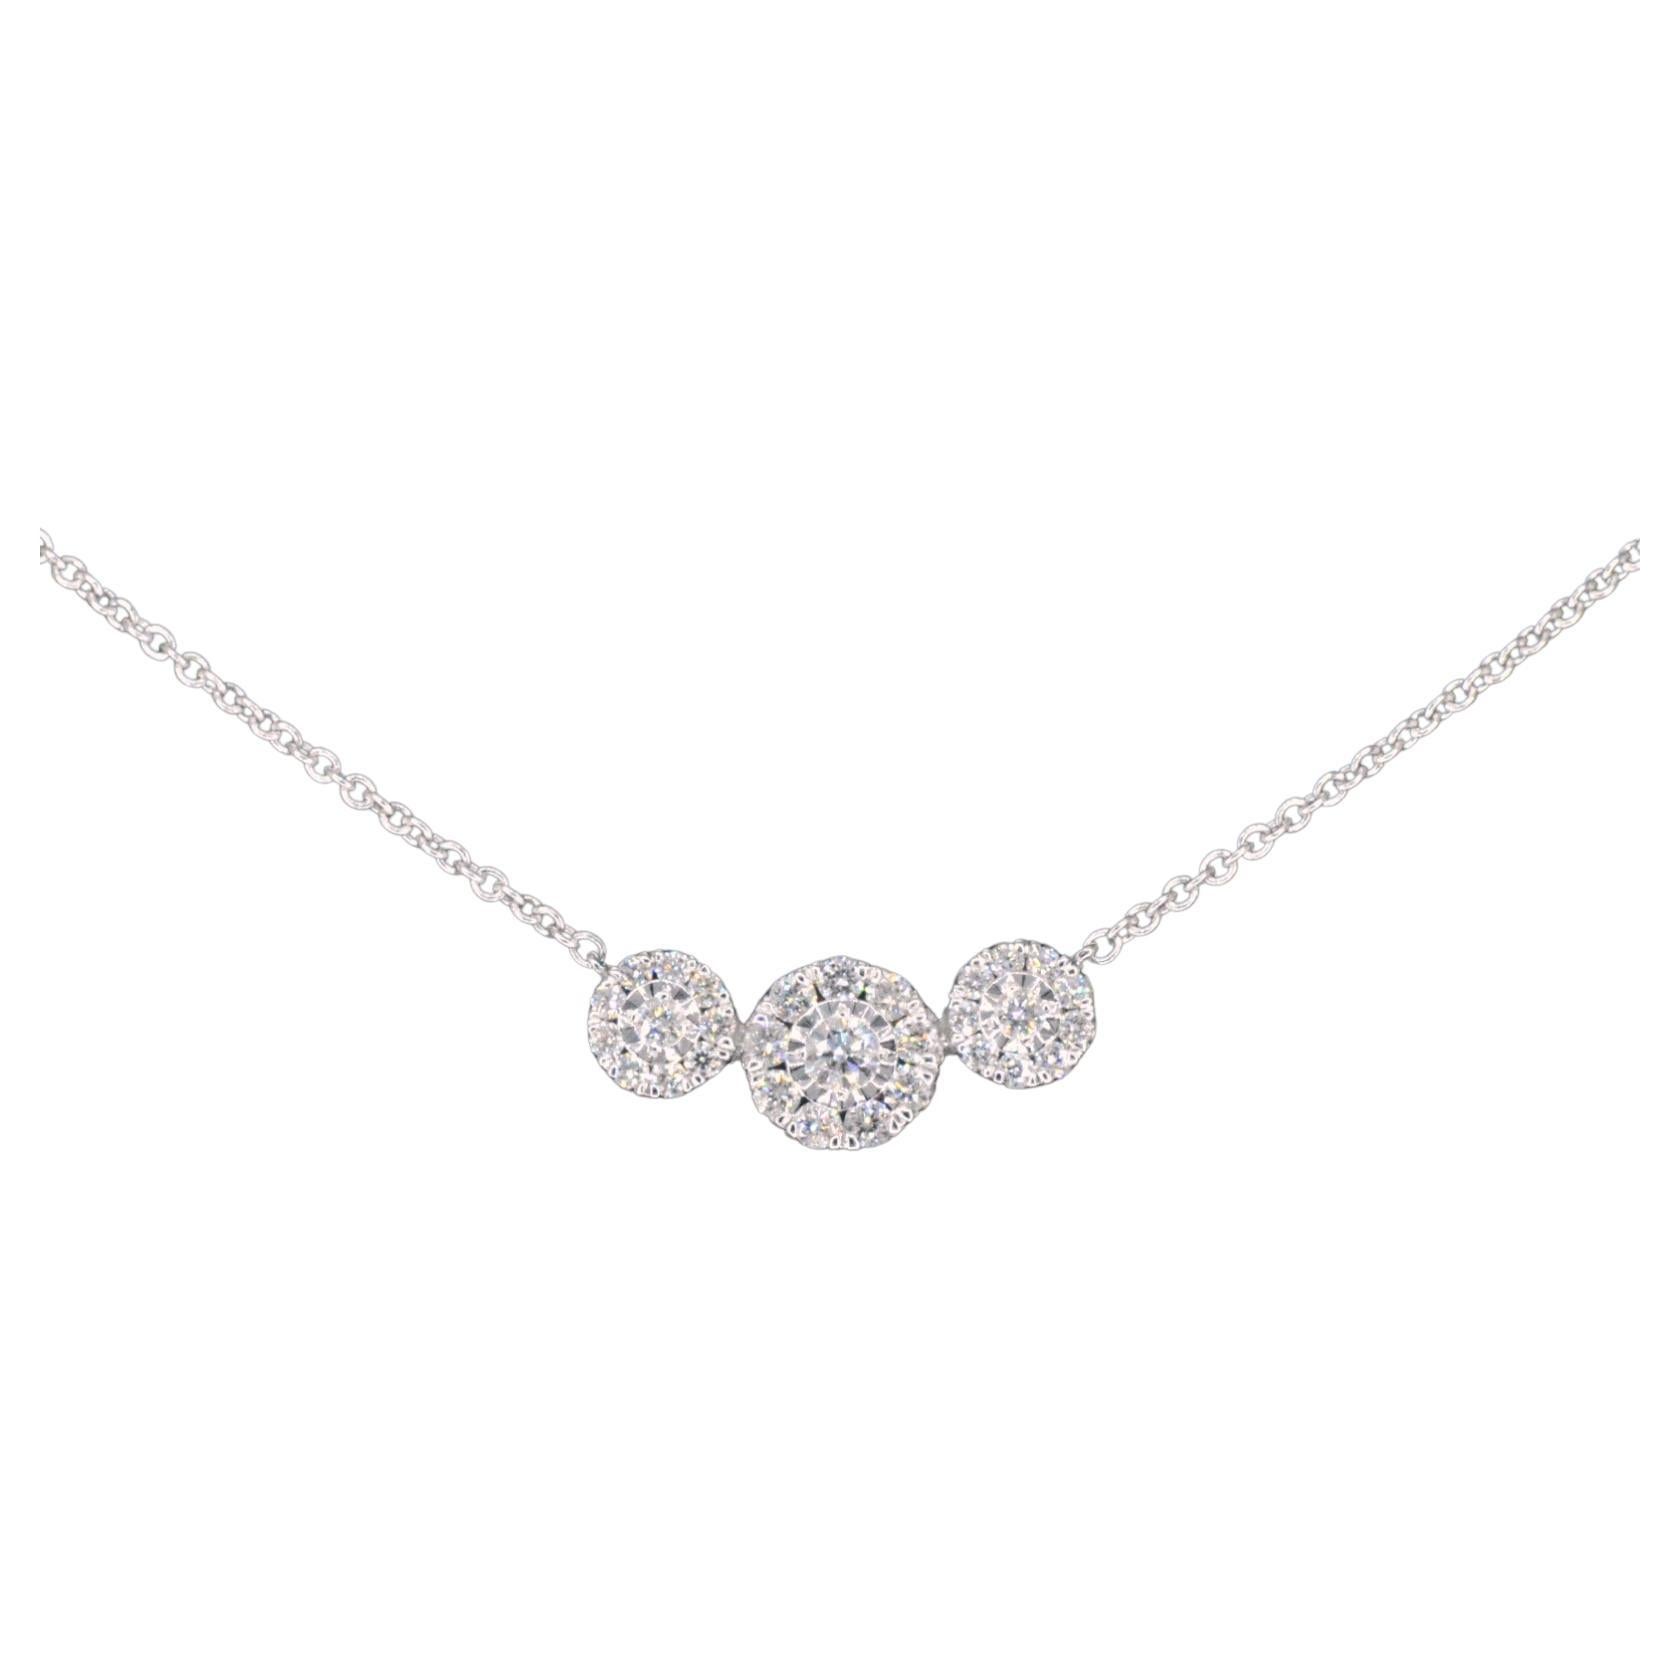 White Gold Necklace with Brilliant Cut Diamonds For Sale